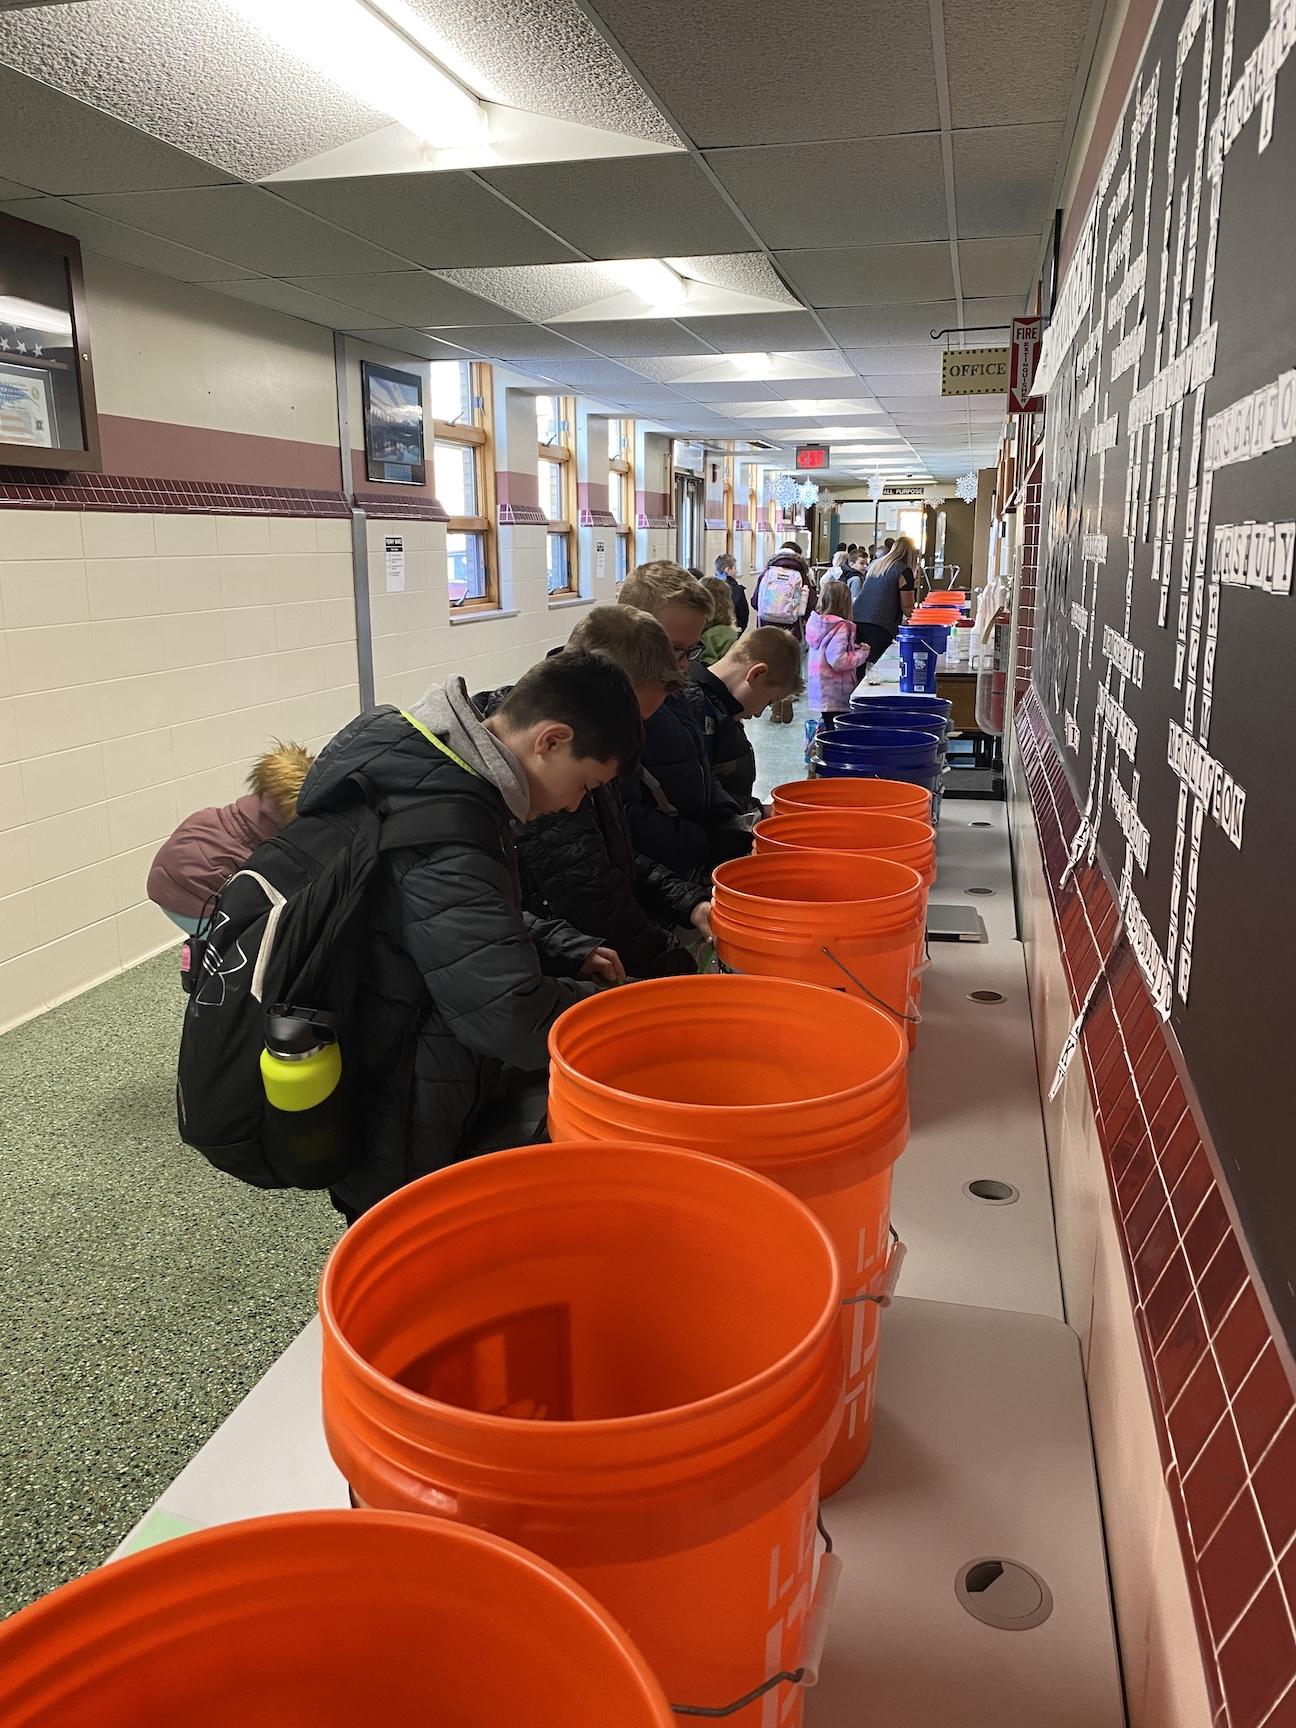 Students gather at the penny war buckets to deposit their coins